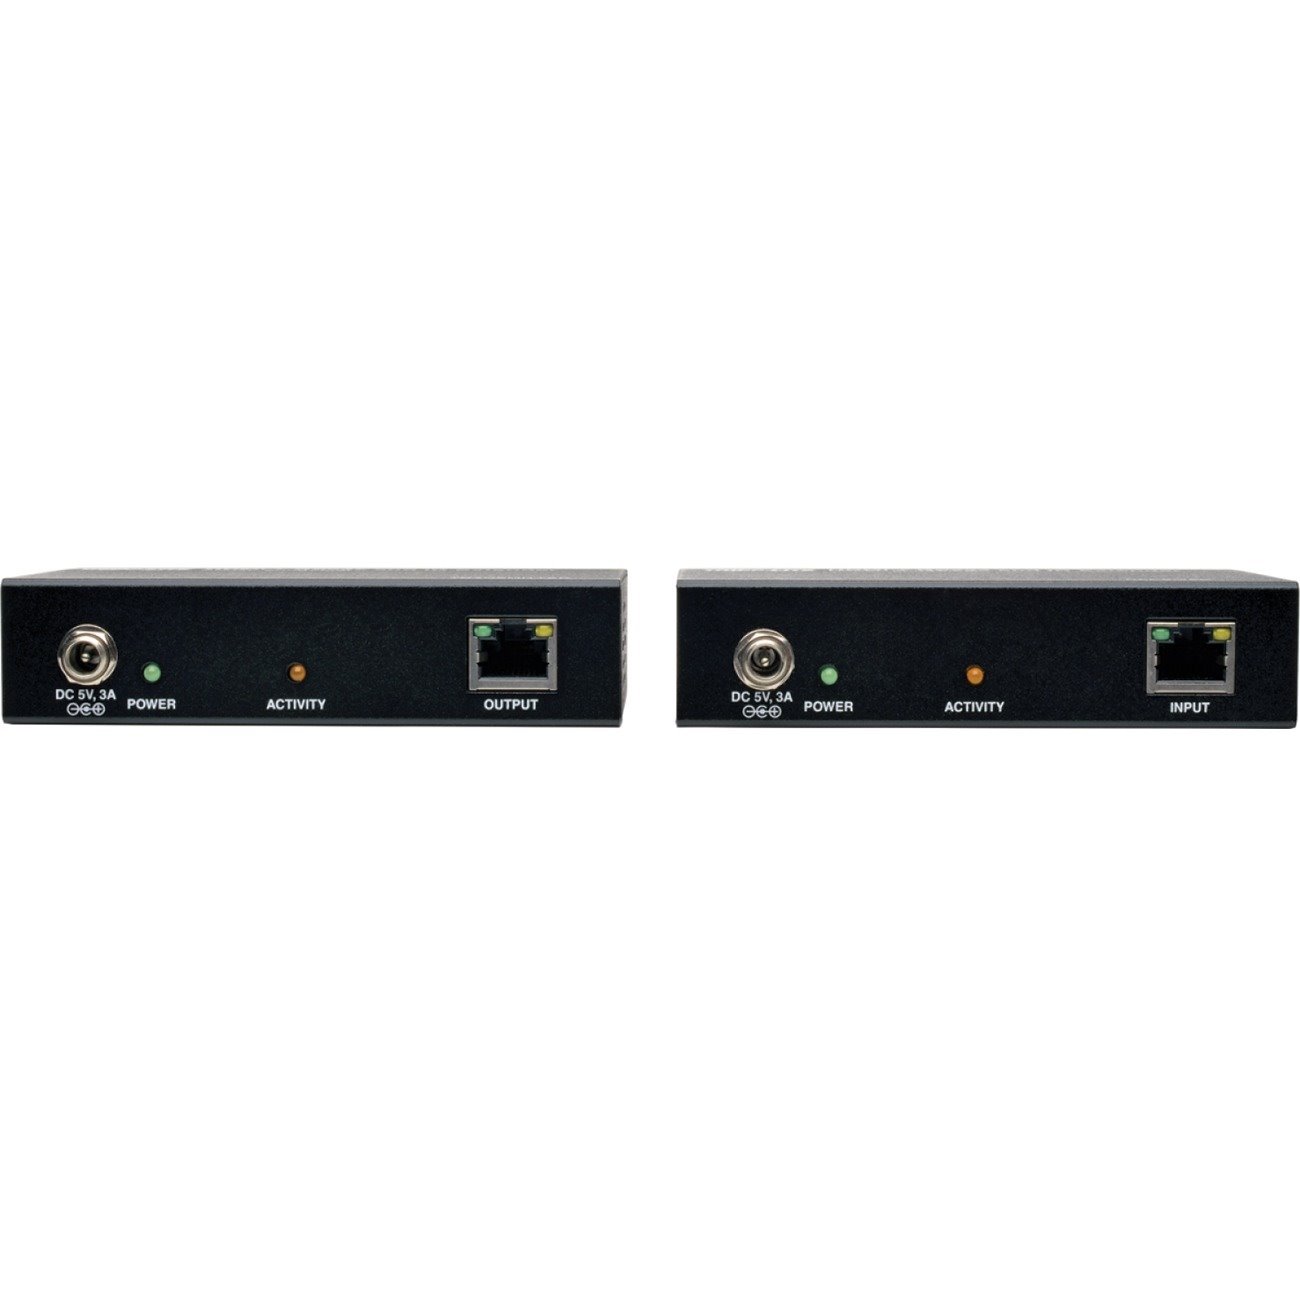 Tripp Lite by Eaton HDBaseT HDMI Over Cat5e/6/6a Extender Kit with Serial and IR Control, 4K x 2K 30 Hz UHD / 1080p 60 Hz, Up to 328 ft. (100 m)